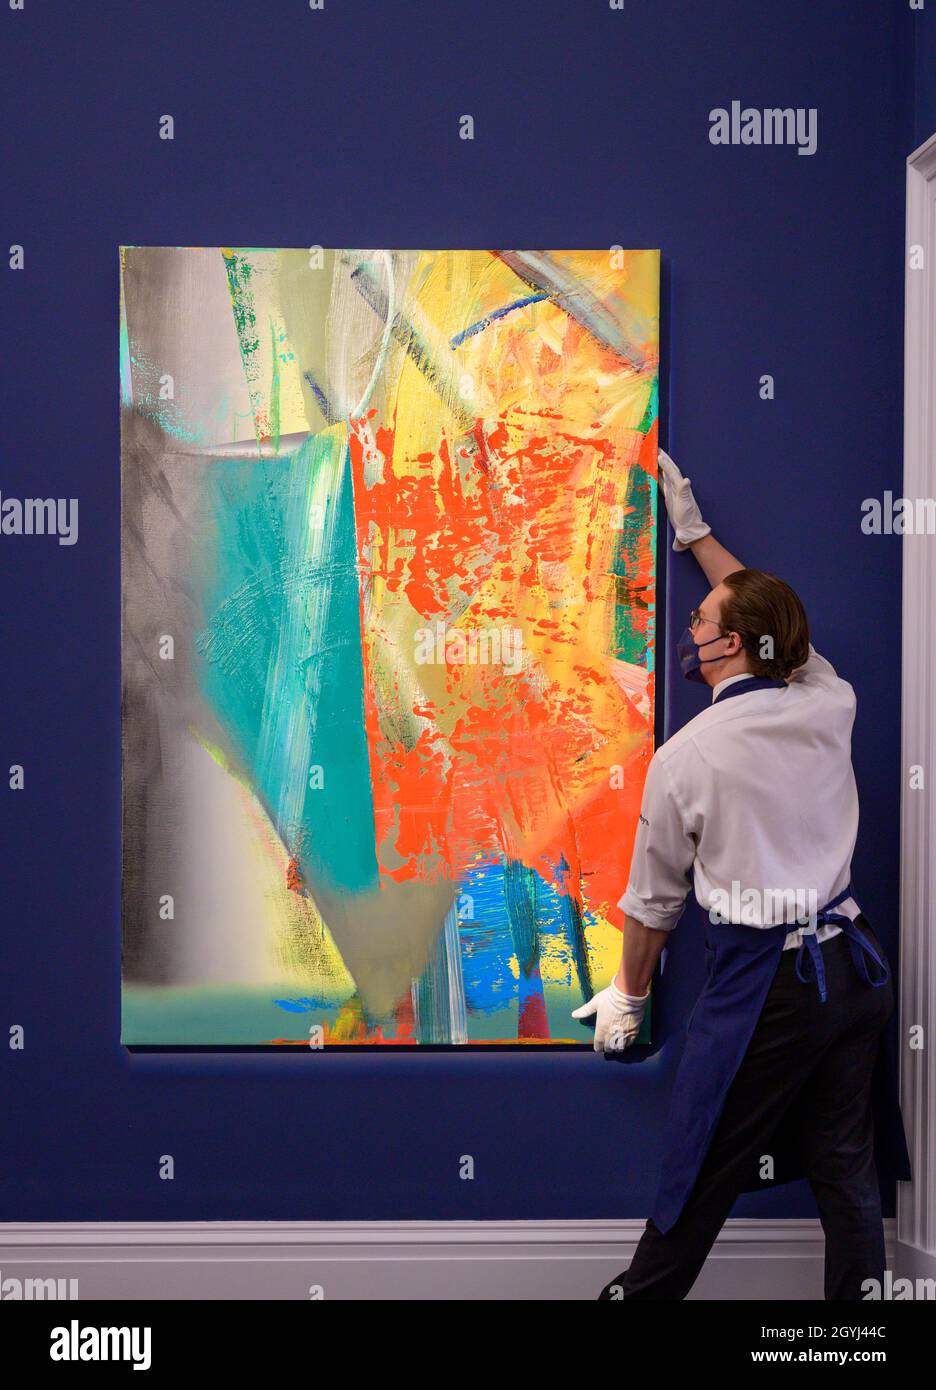 Sotheby’s, London, UK. 8 October 2021. The Contemporary art evening auction takes place during Frieze Week on 14 October includes works by Richter, Toor, Yukhnovich, Riley and Kusama. Image (centre): Gerhard Richter, Abstraktes Bild, estimate £5,000,000-7,000,000. Credit: Malcolm Park/Alamy Live News. Stock Photo